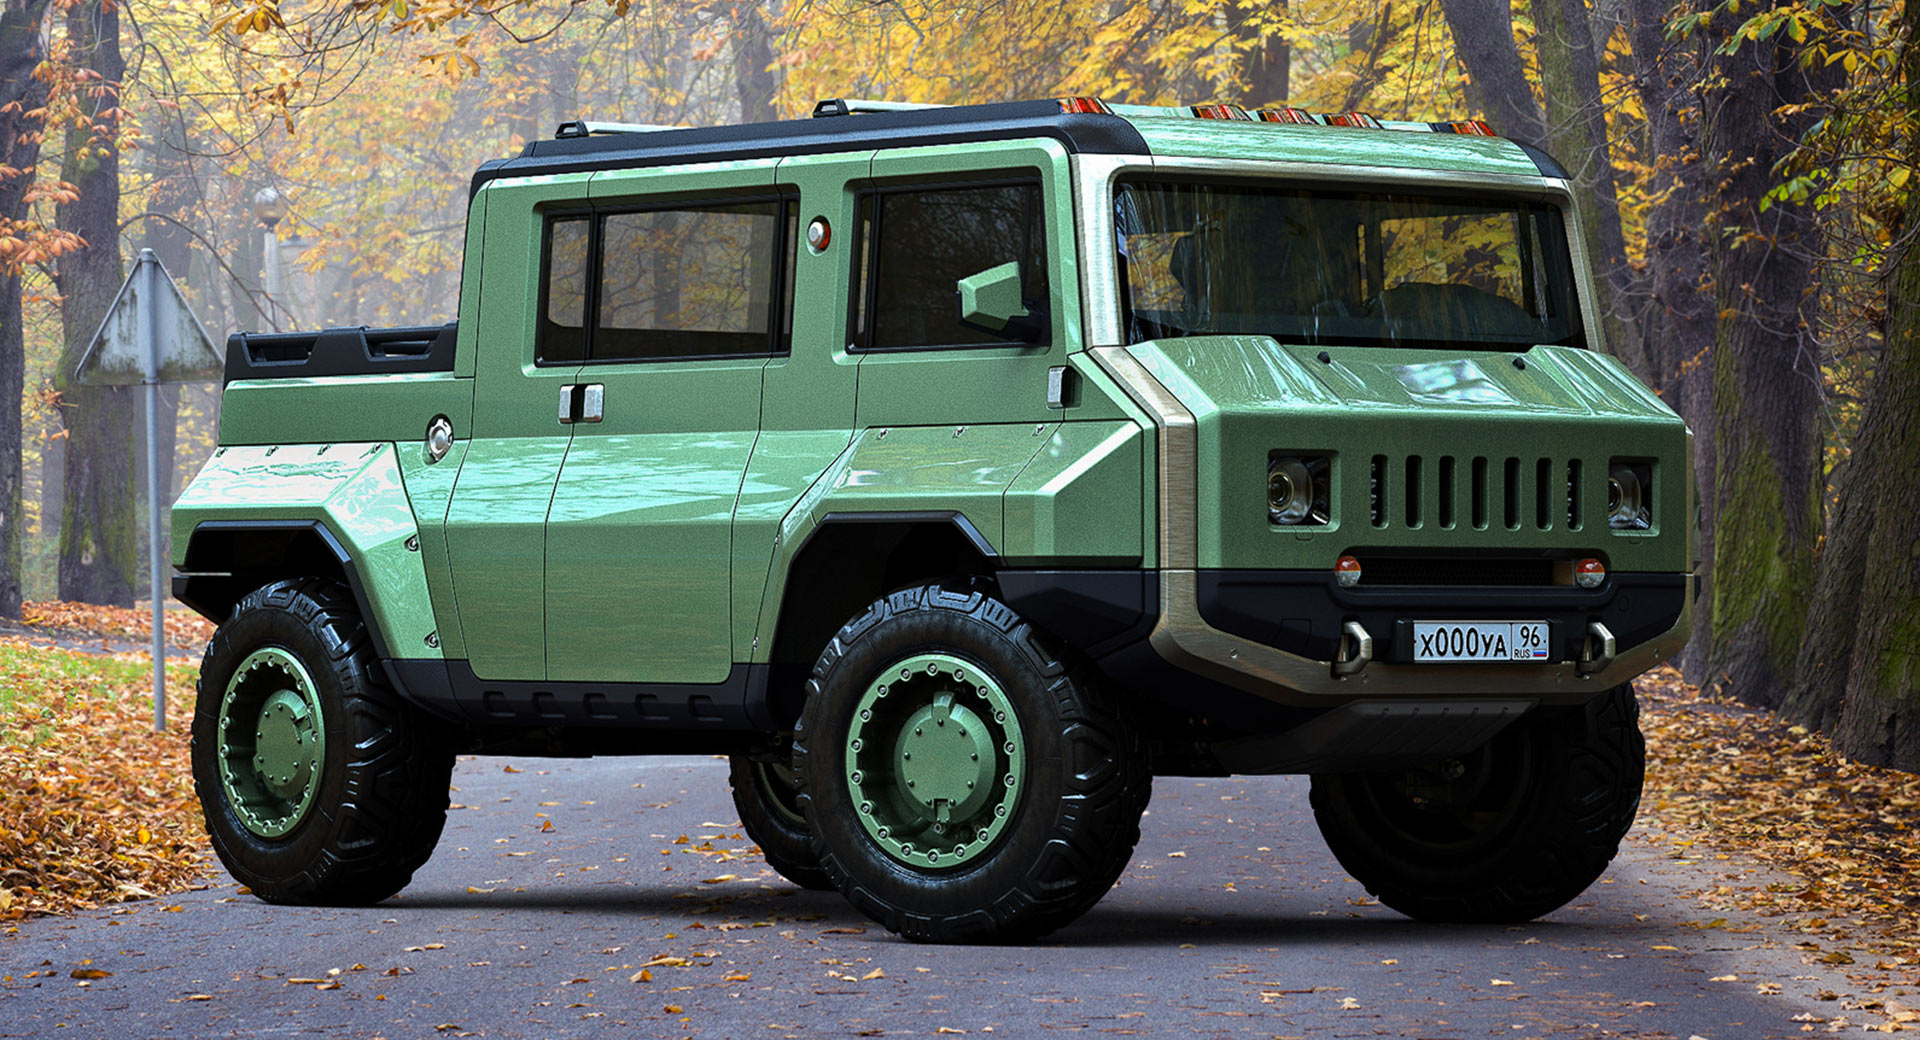 H Uaz American Hummer And Russian Uaz Mishmash Promotes Making Love